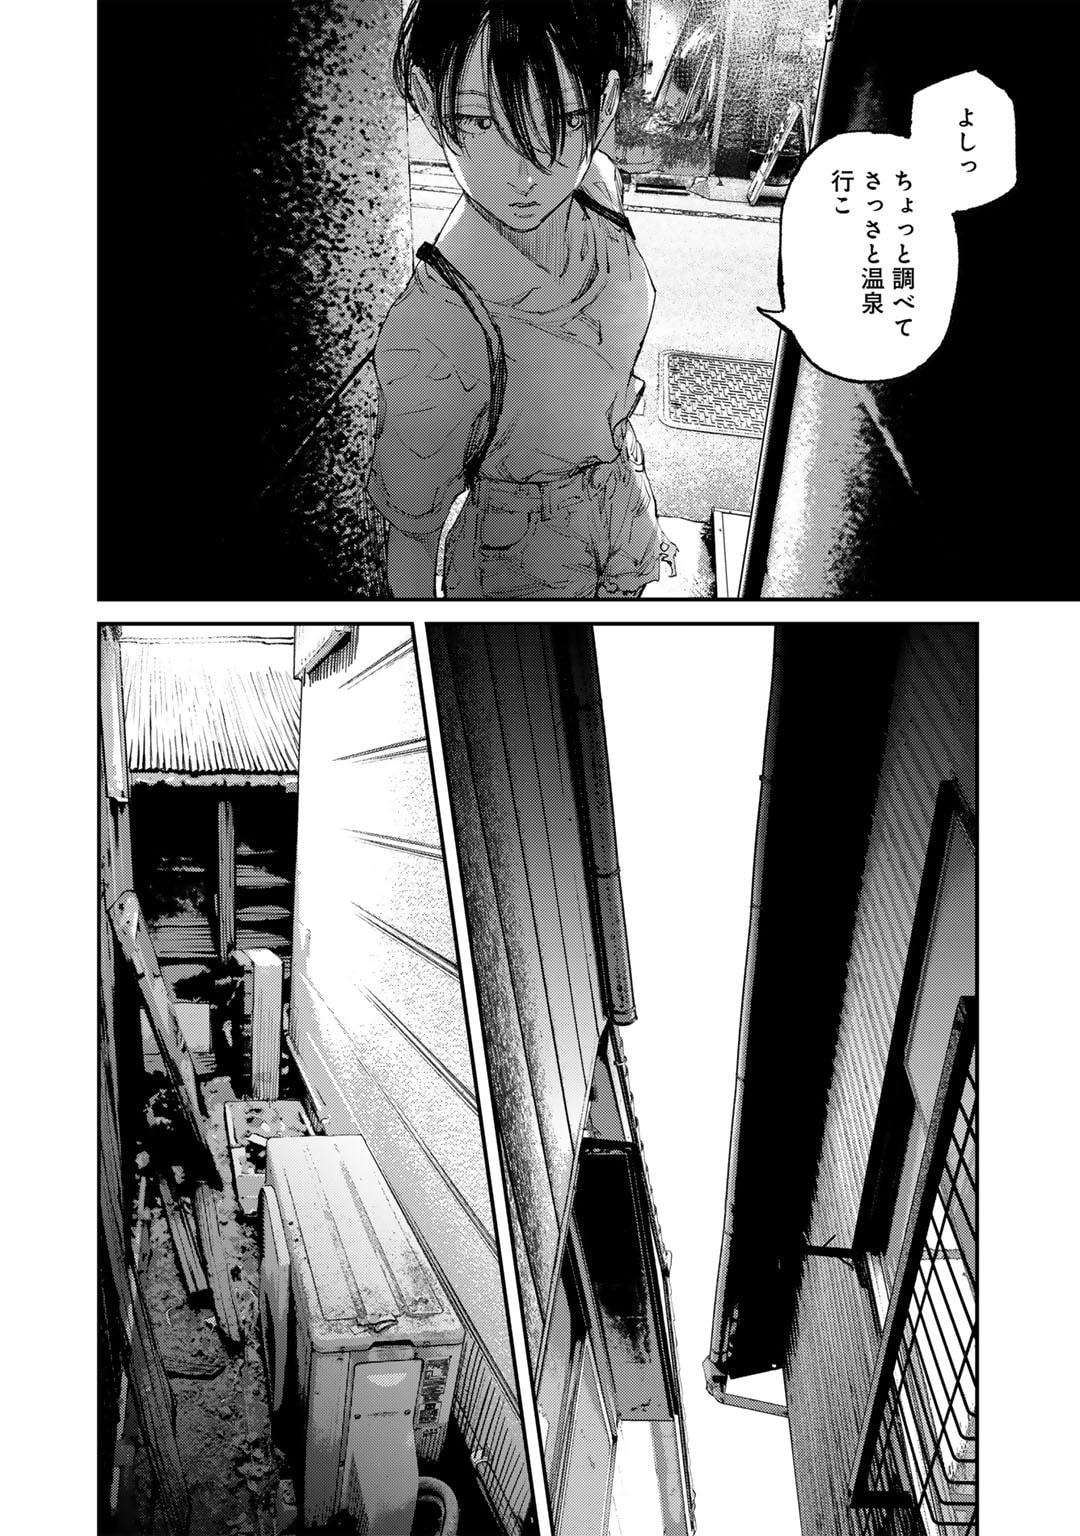 Kanata Is Into More Darker - Chapter 6 - Page 8